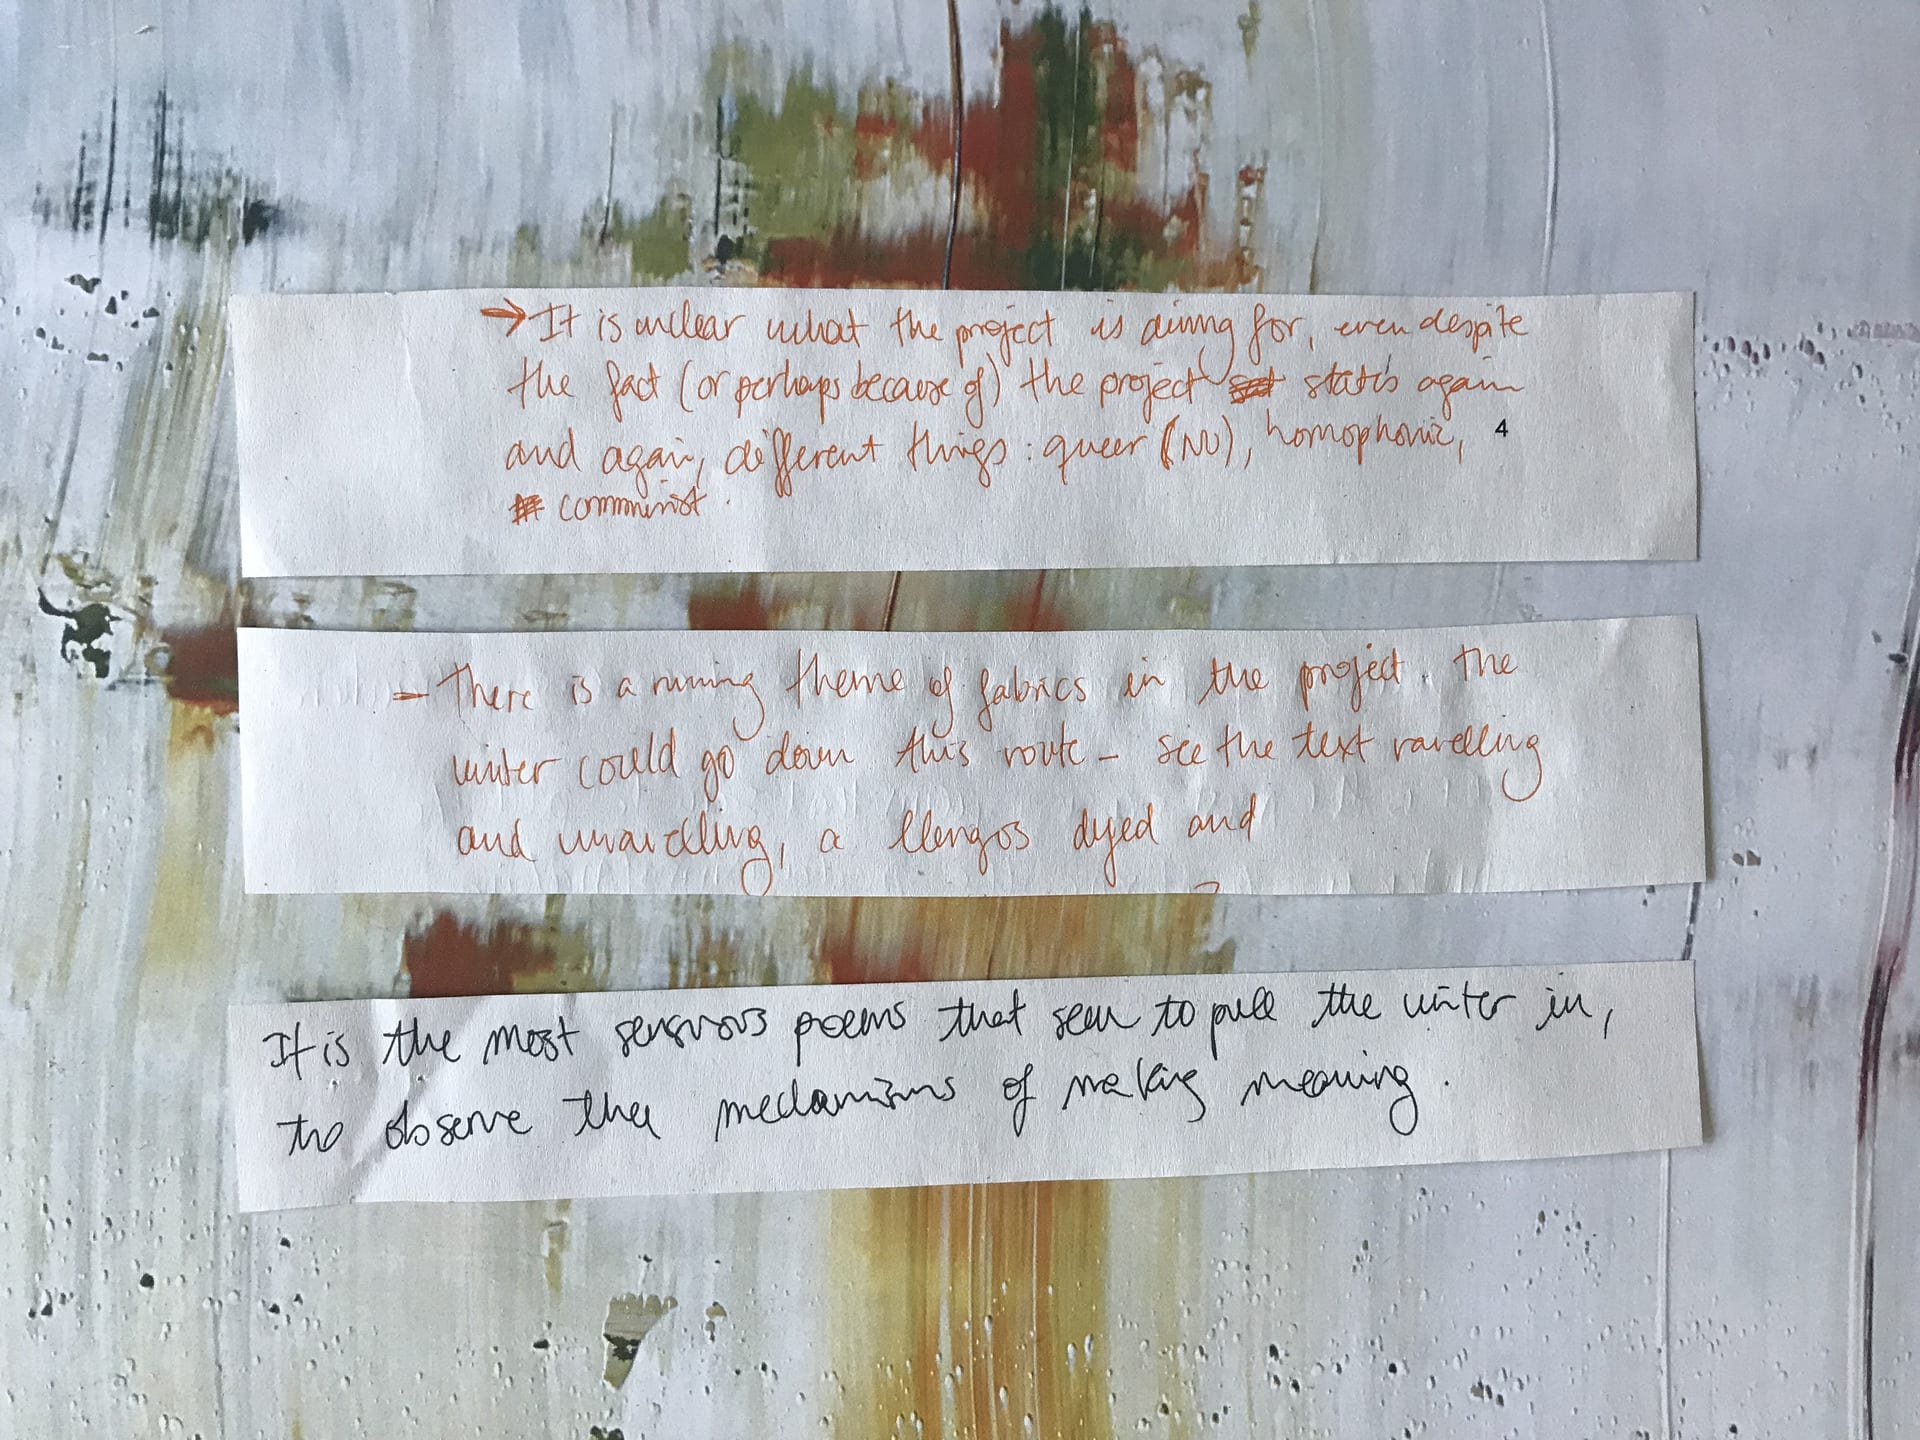 Three snippets of paper on a messy painted background